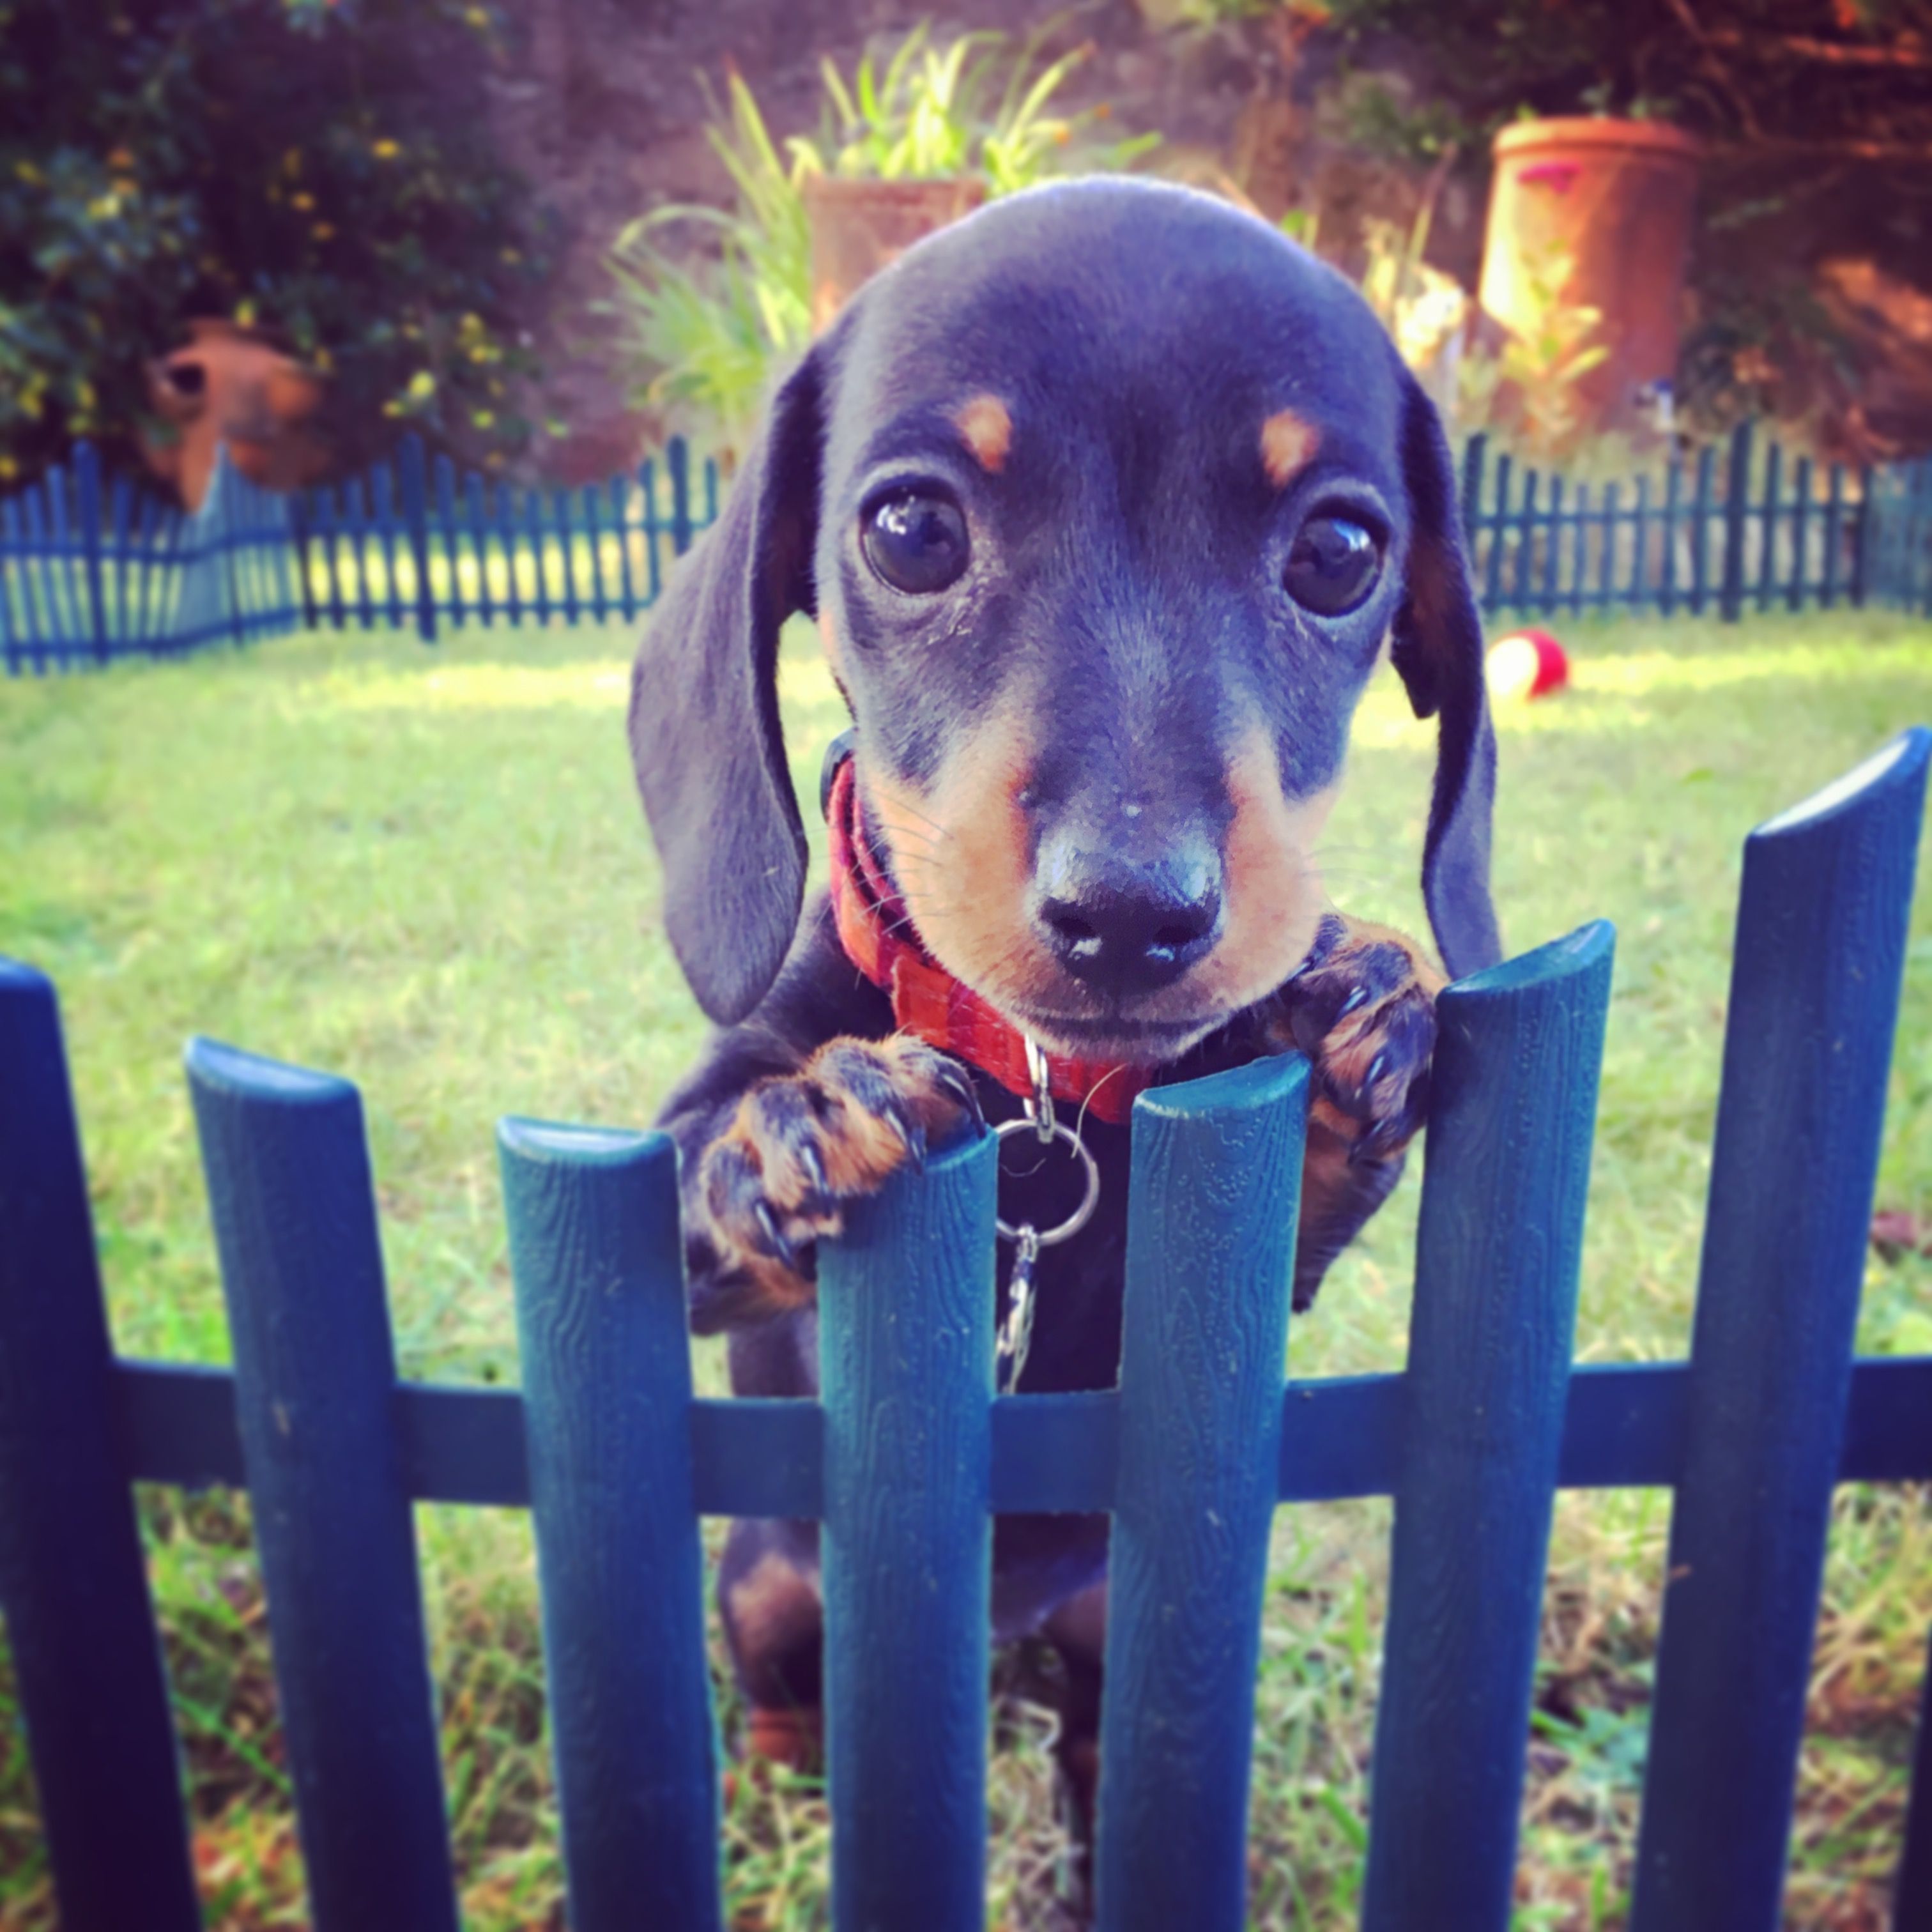 Dachshund puppy standing up behind the fence in the lawn